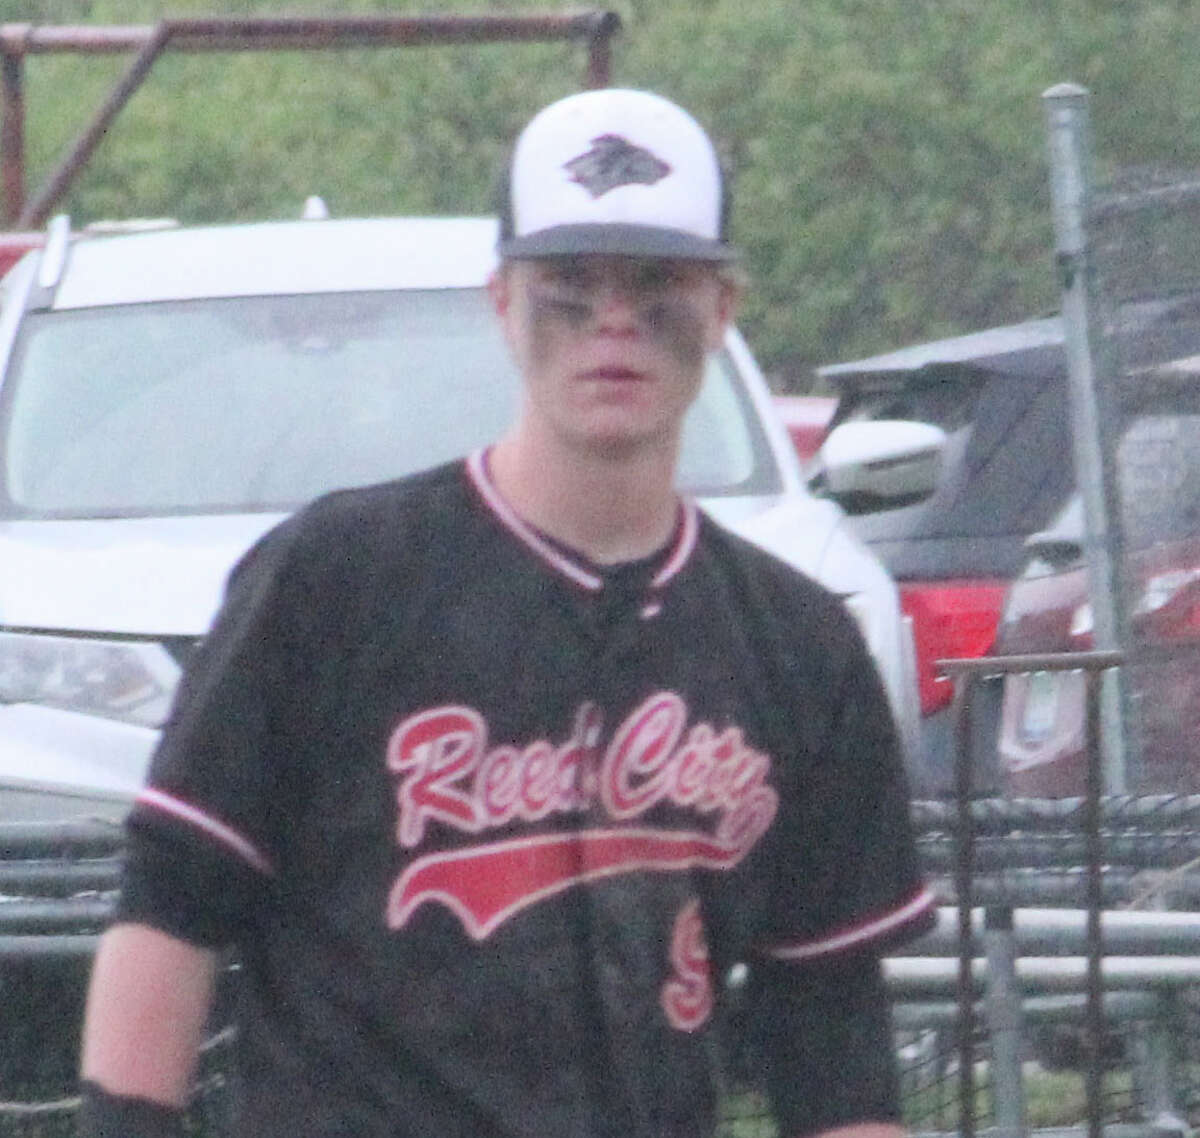 Reed City's Max Hammond has a no-hitter and perfect game to his credit so far this season.